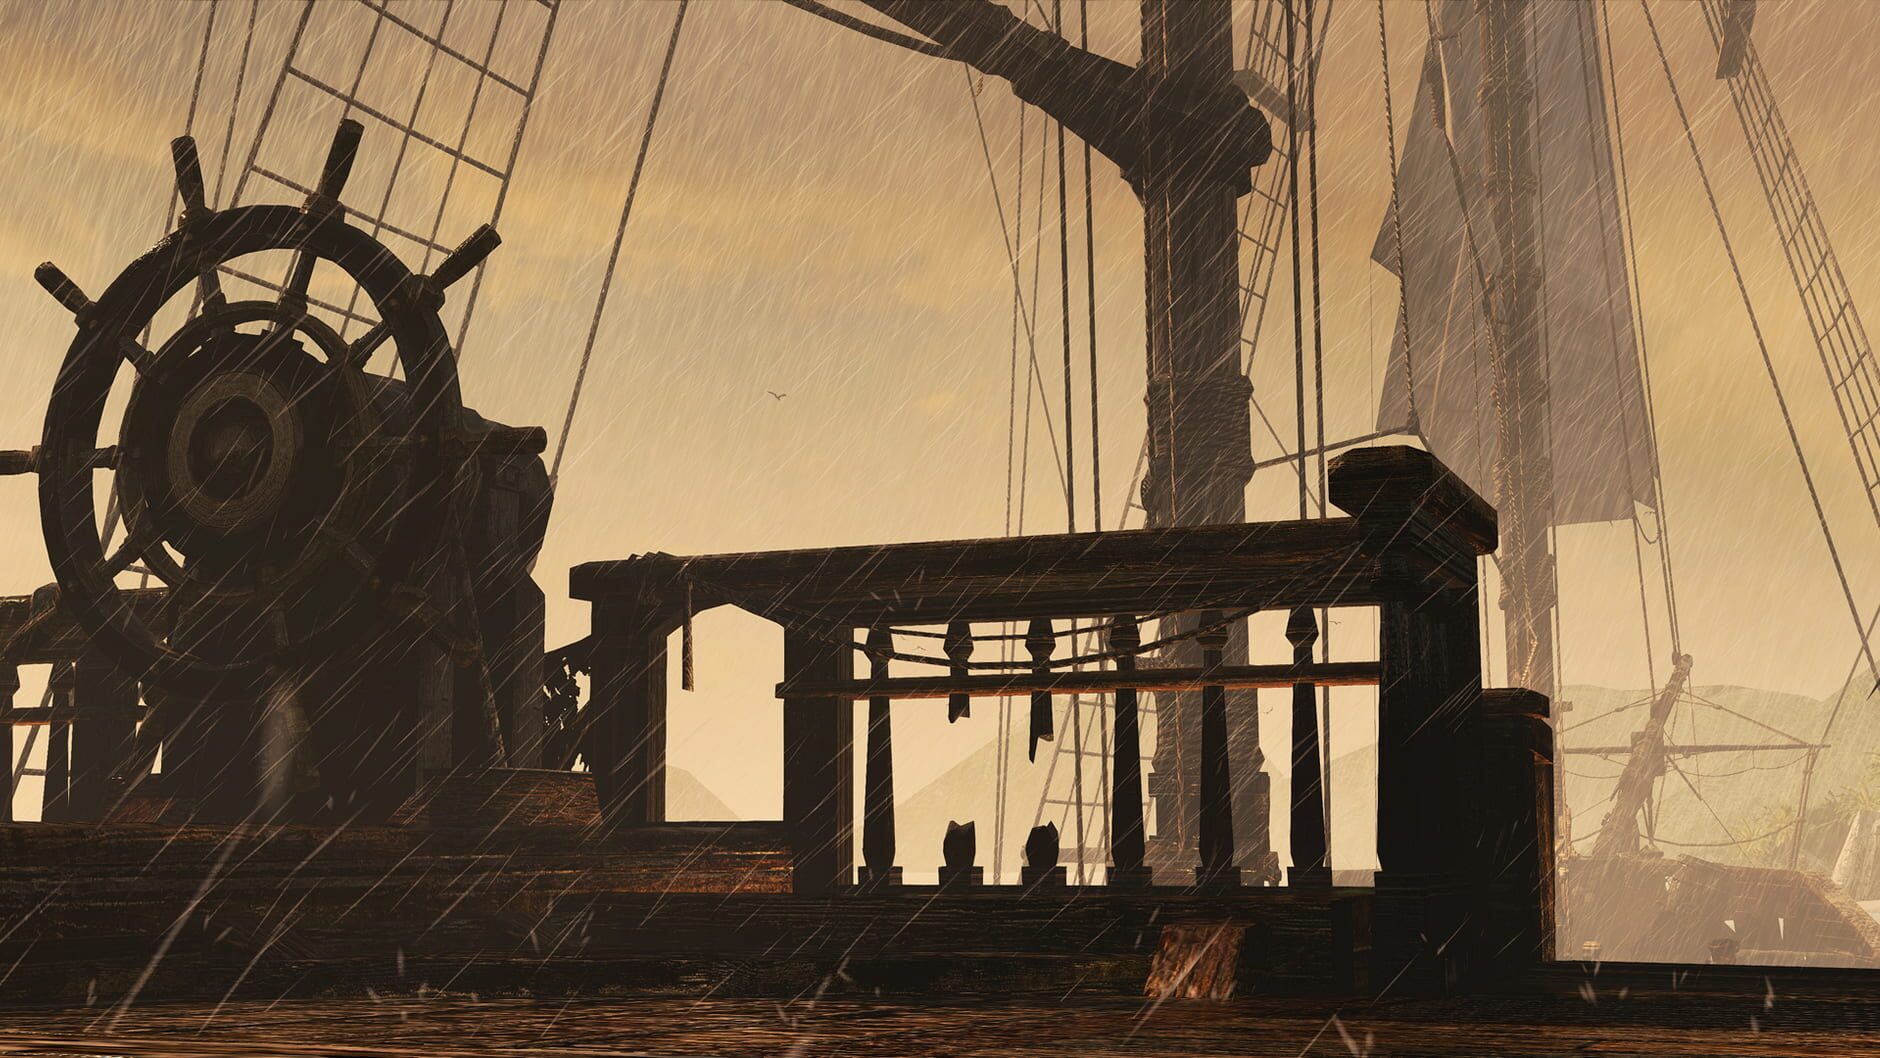 Screenshot for Assassin's Creed: Freedom Cry